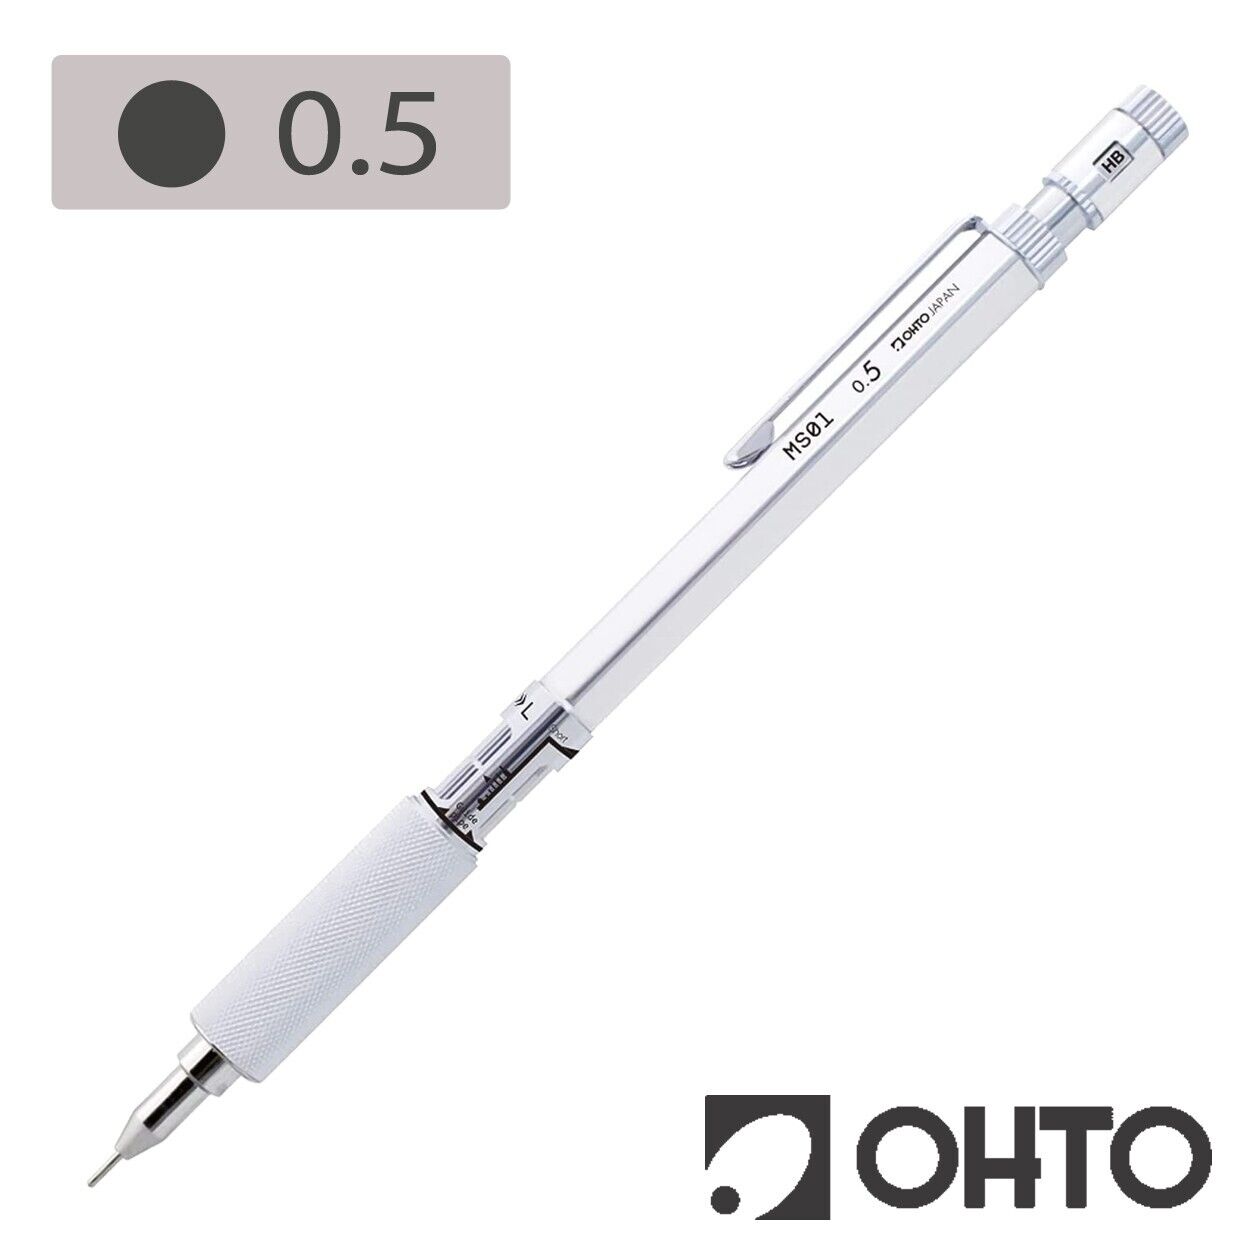 OHTO Aluminum Knurled Grip Mechanical Pencil  MS01 0.5mm Made in Japan